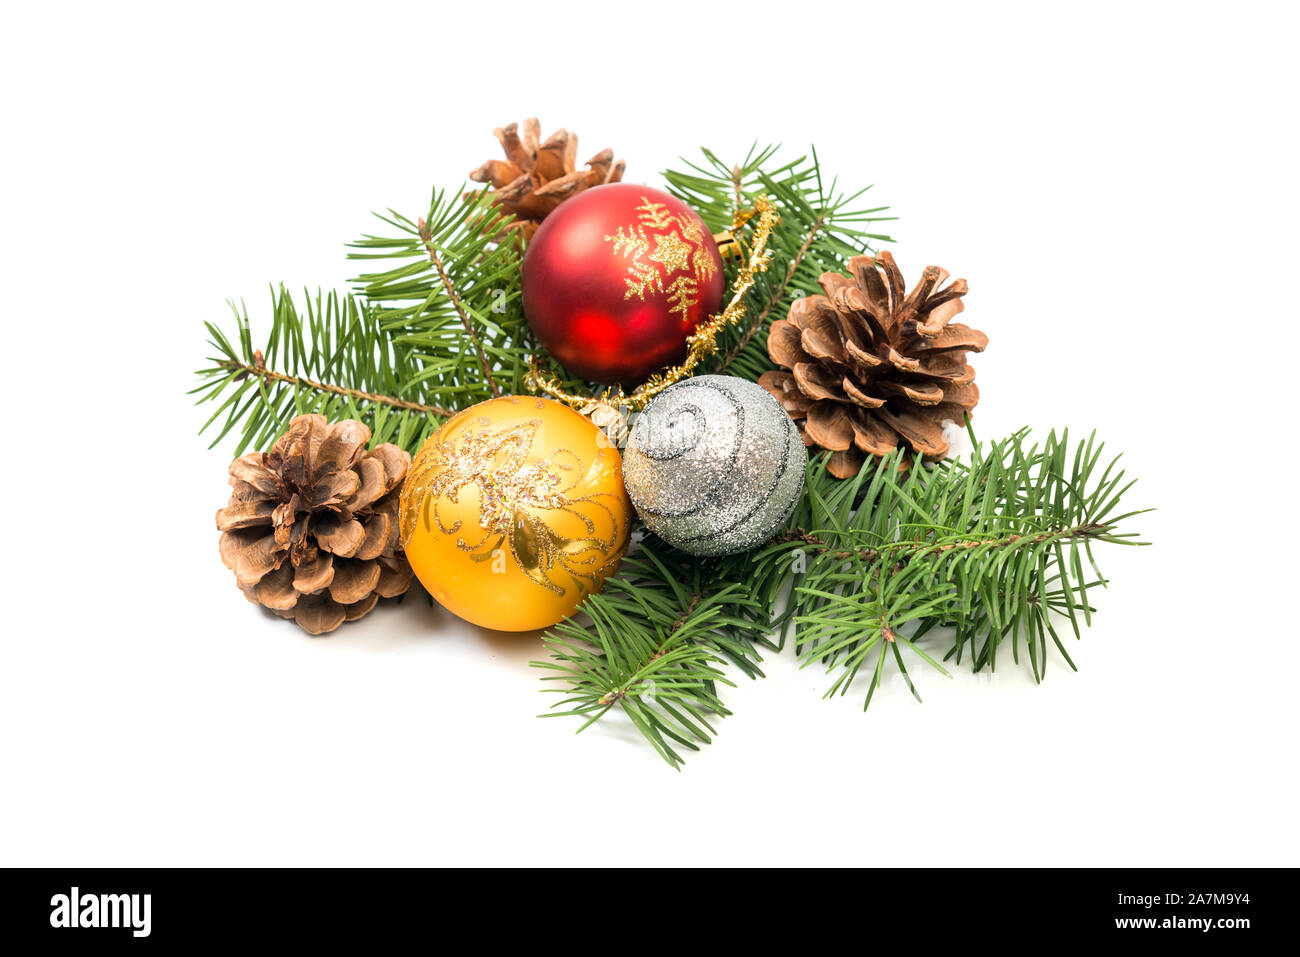 Pine cones with spruce tree branch and Christmas decoration bauble balls on a white background. Stock Photo